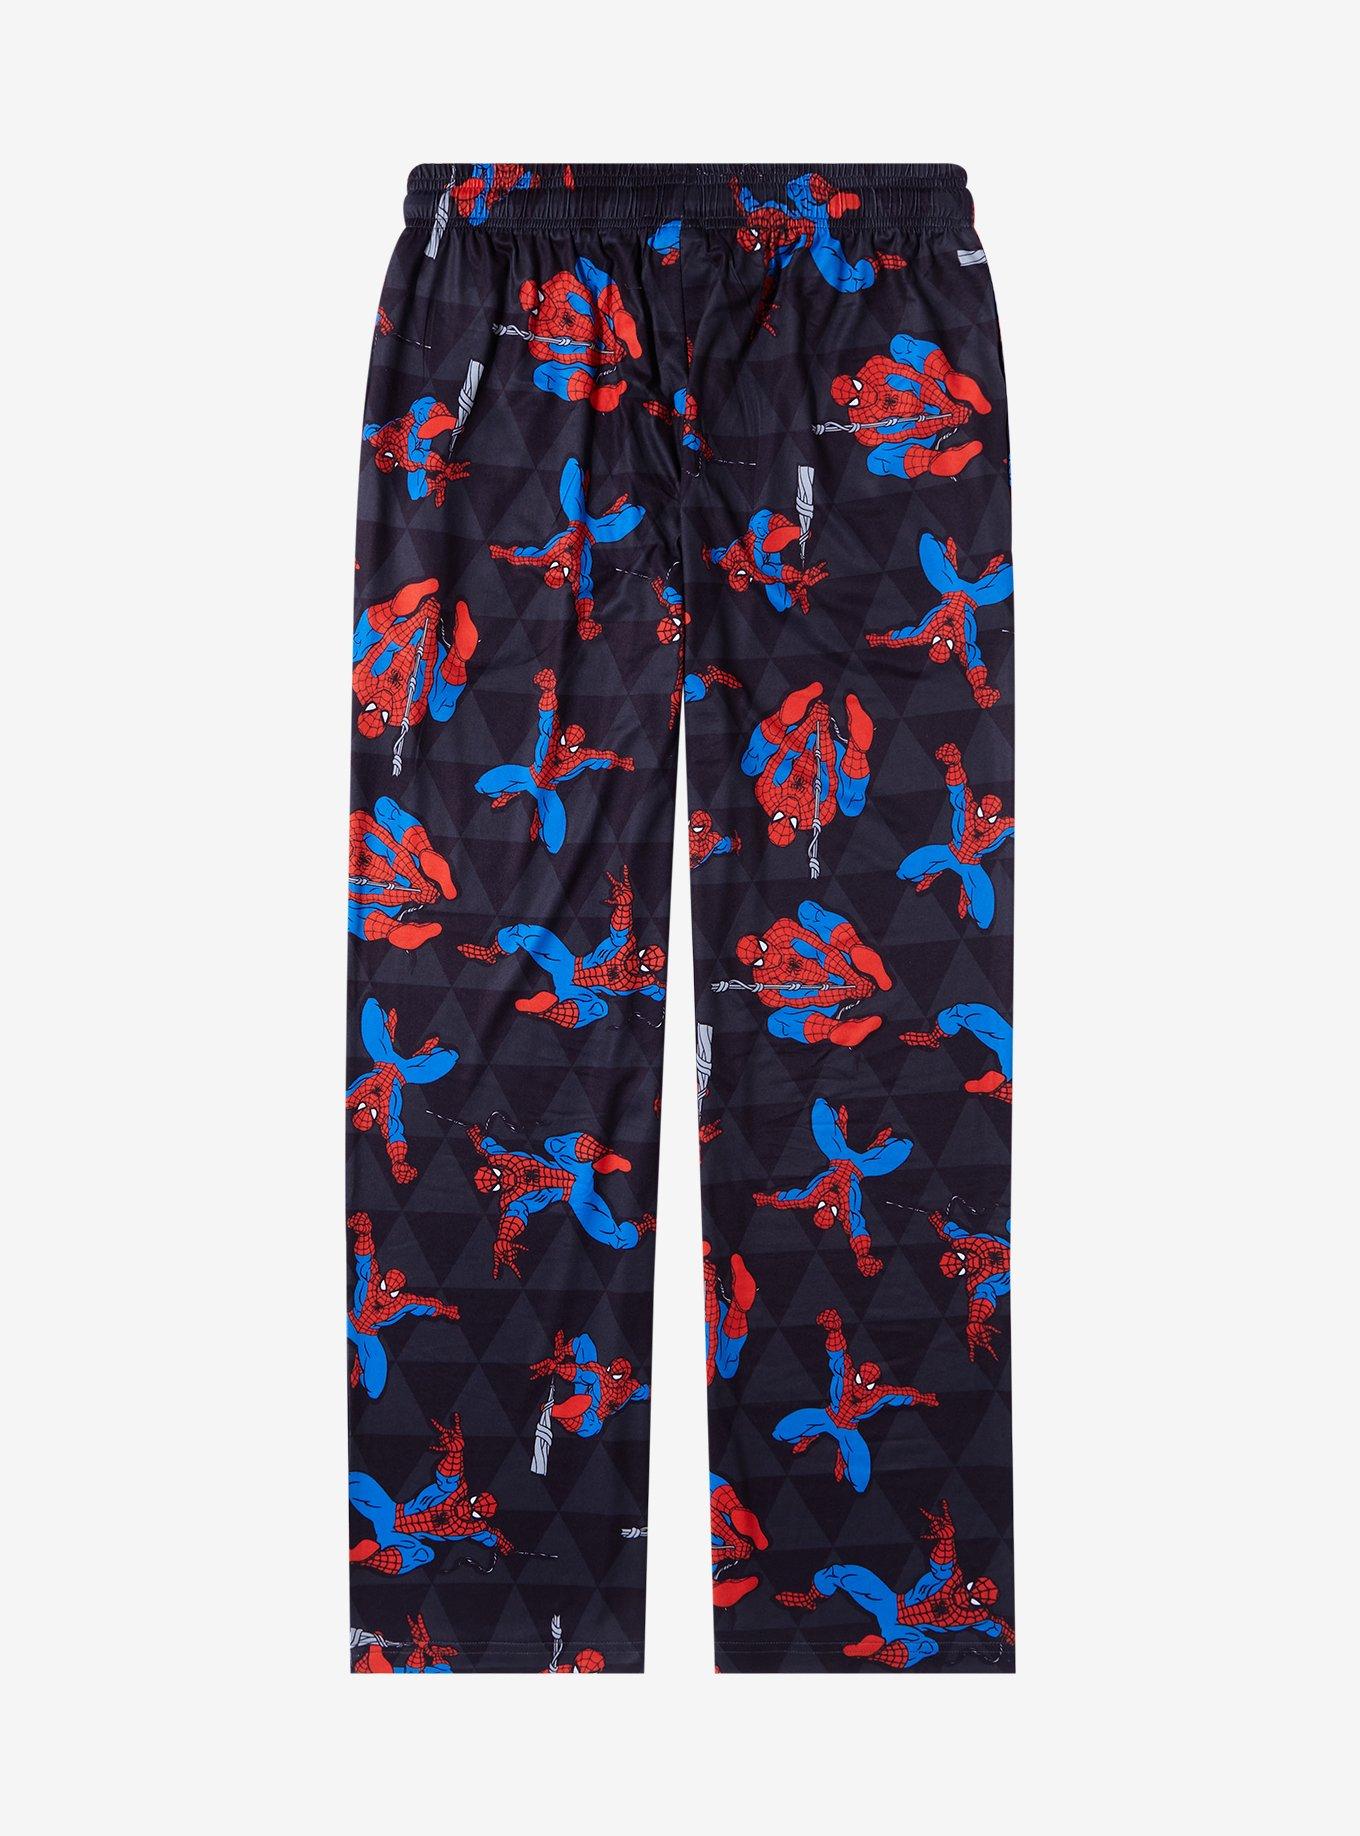 Marvel Spider-Man Allover Print Sleep Pants - BoxLunch Exclusive | BoxLunch